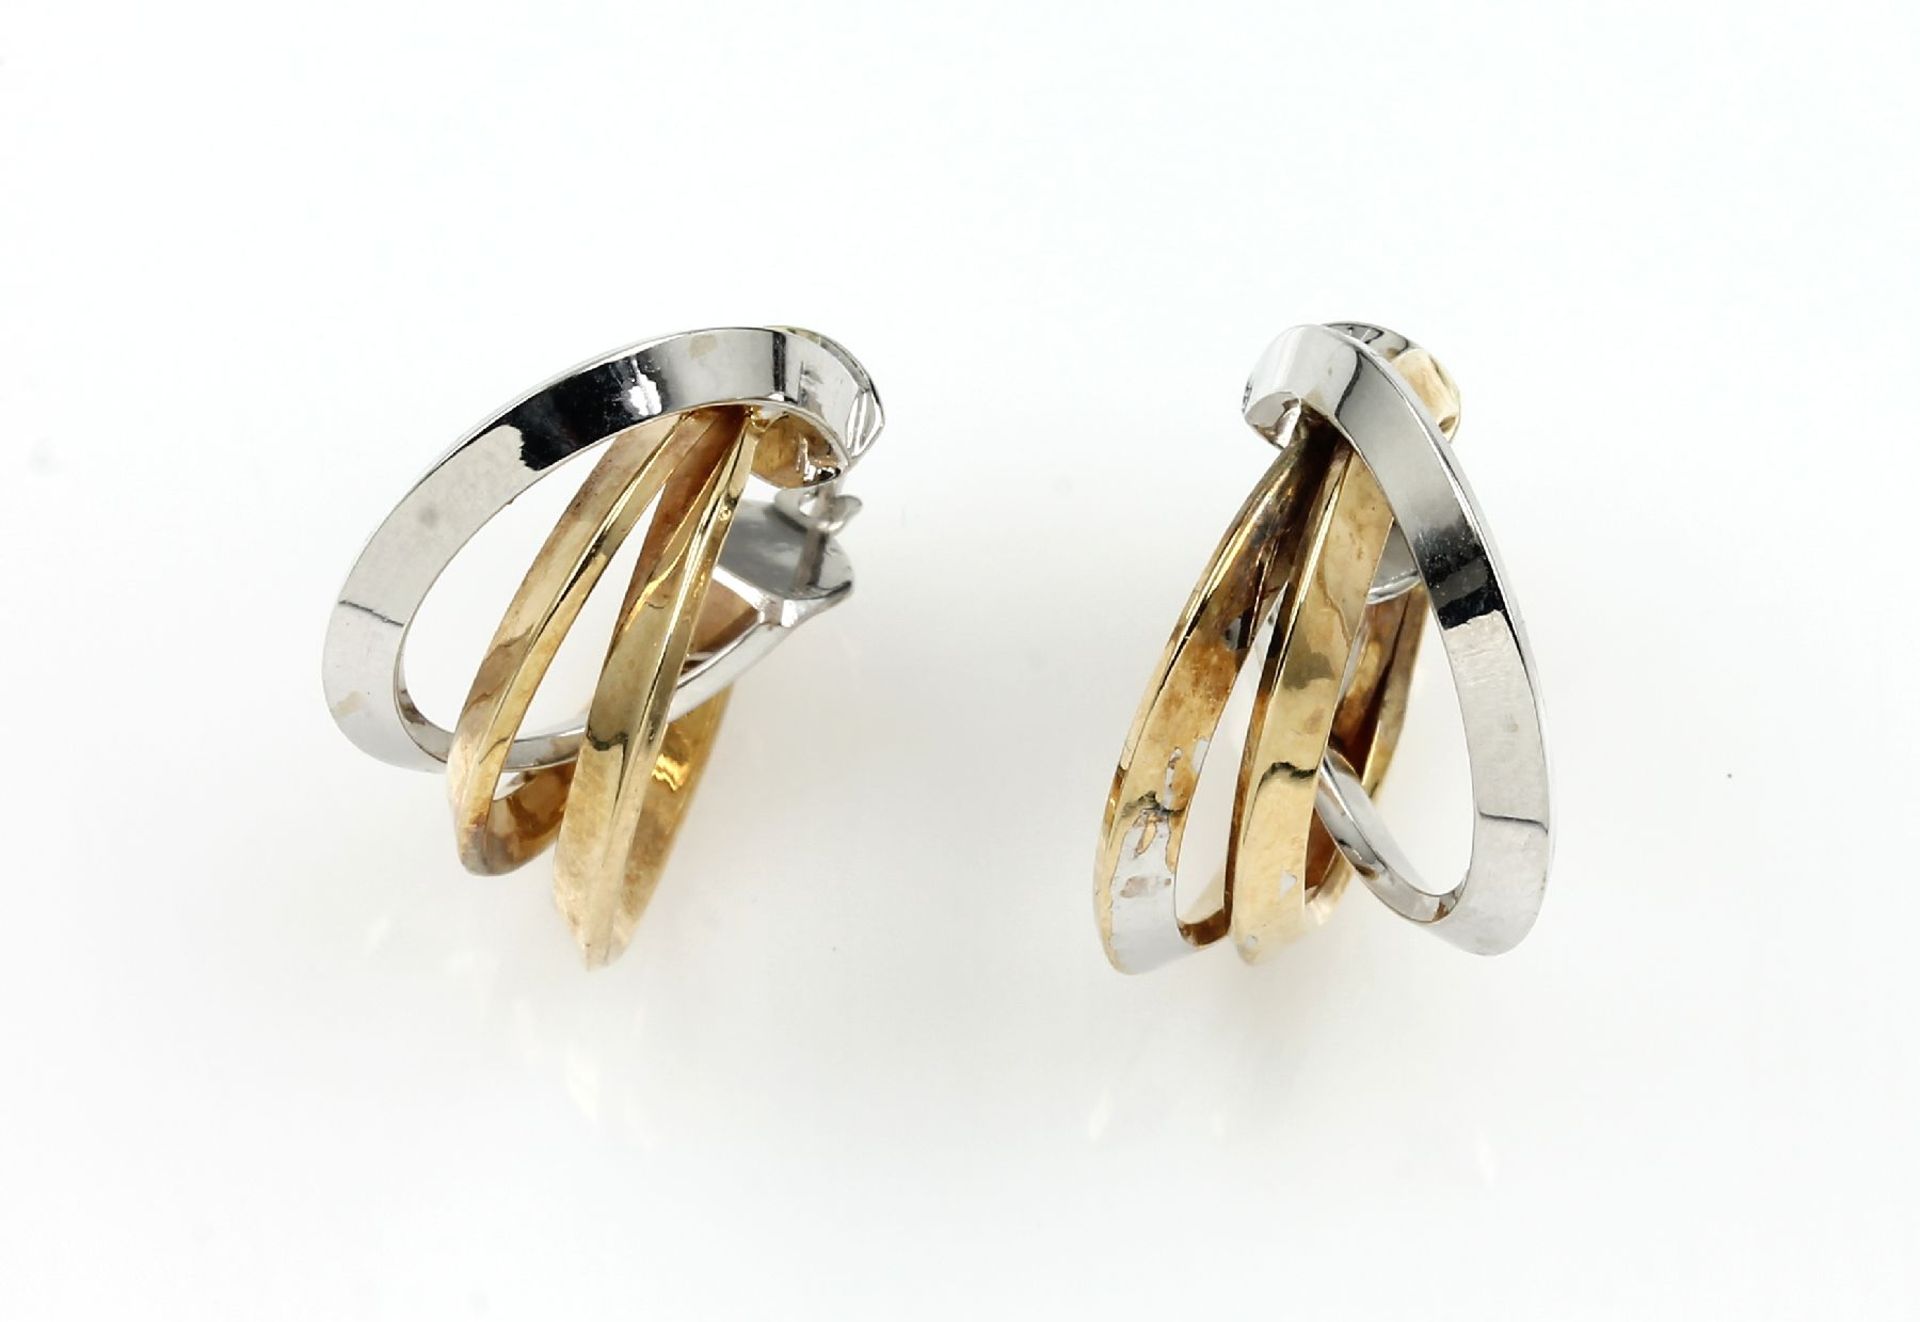 Pair of 14 kt gold hoop earrings , YG/WG 585/000, approx. 4.3 g, intertwined links, manufacturer's